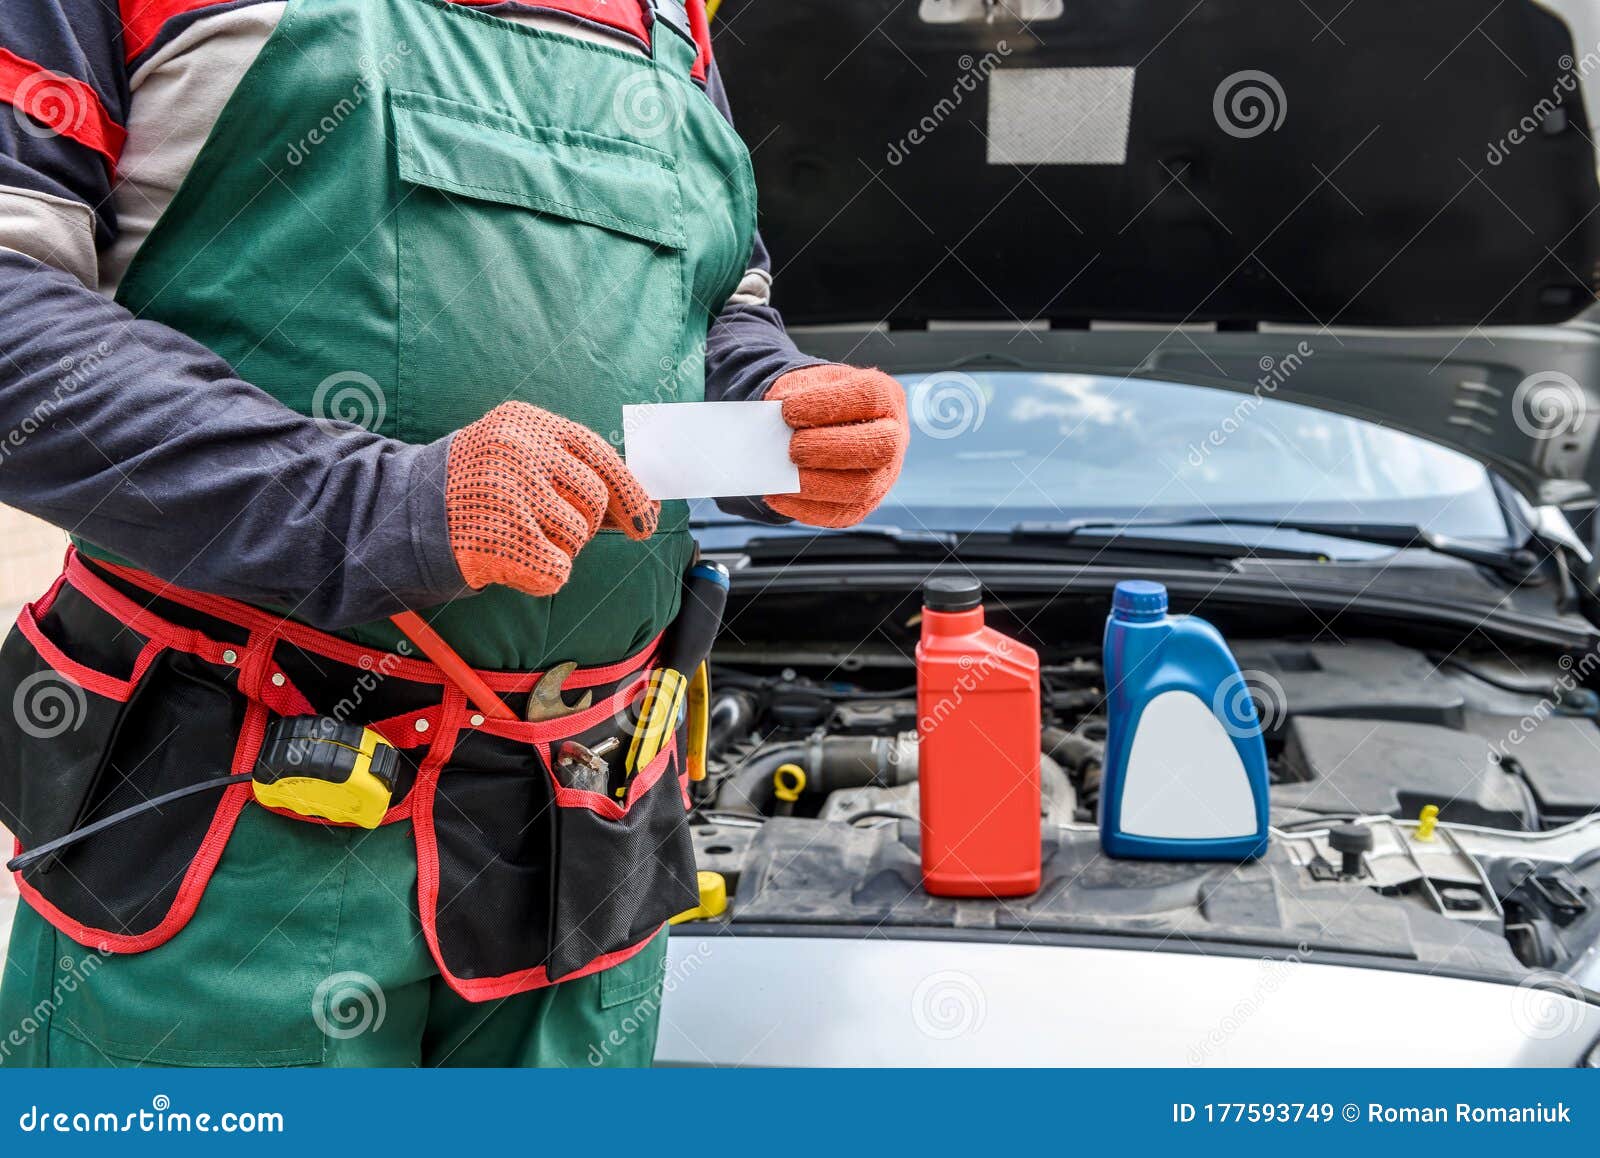 Mechanic With Visit Card Posing Near Car With Open Hood Stock Image